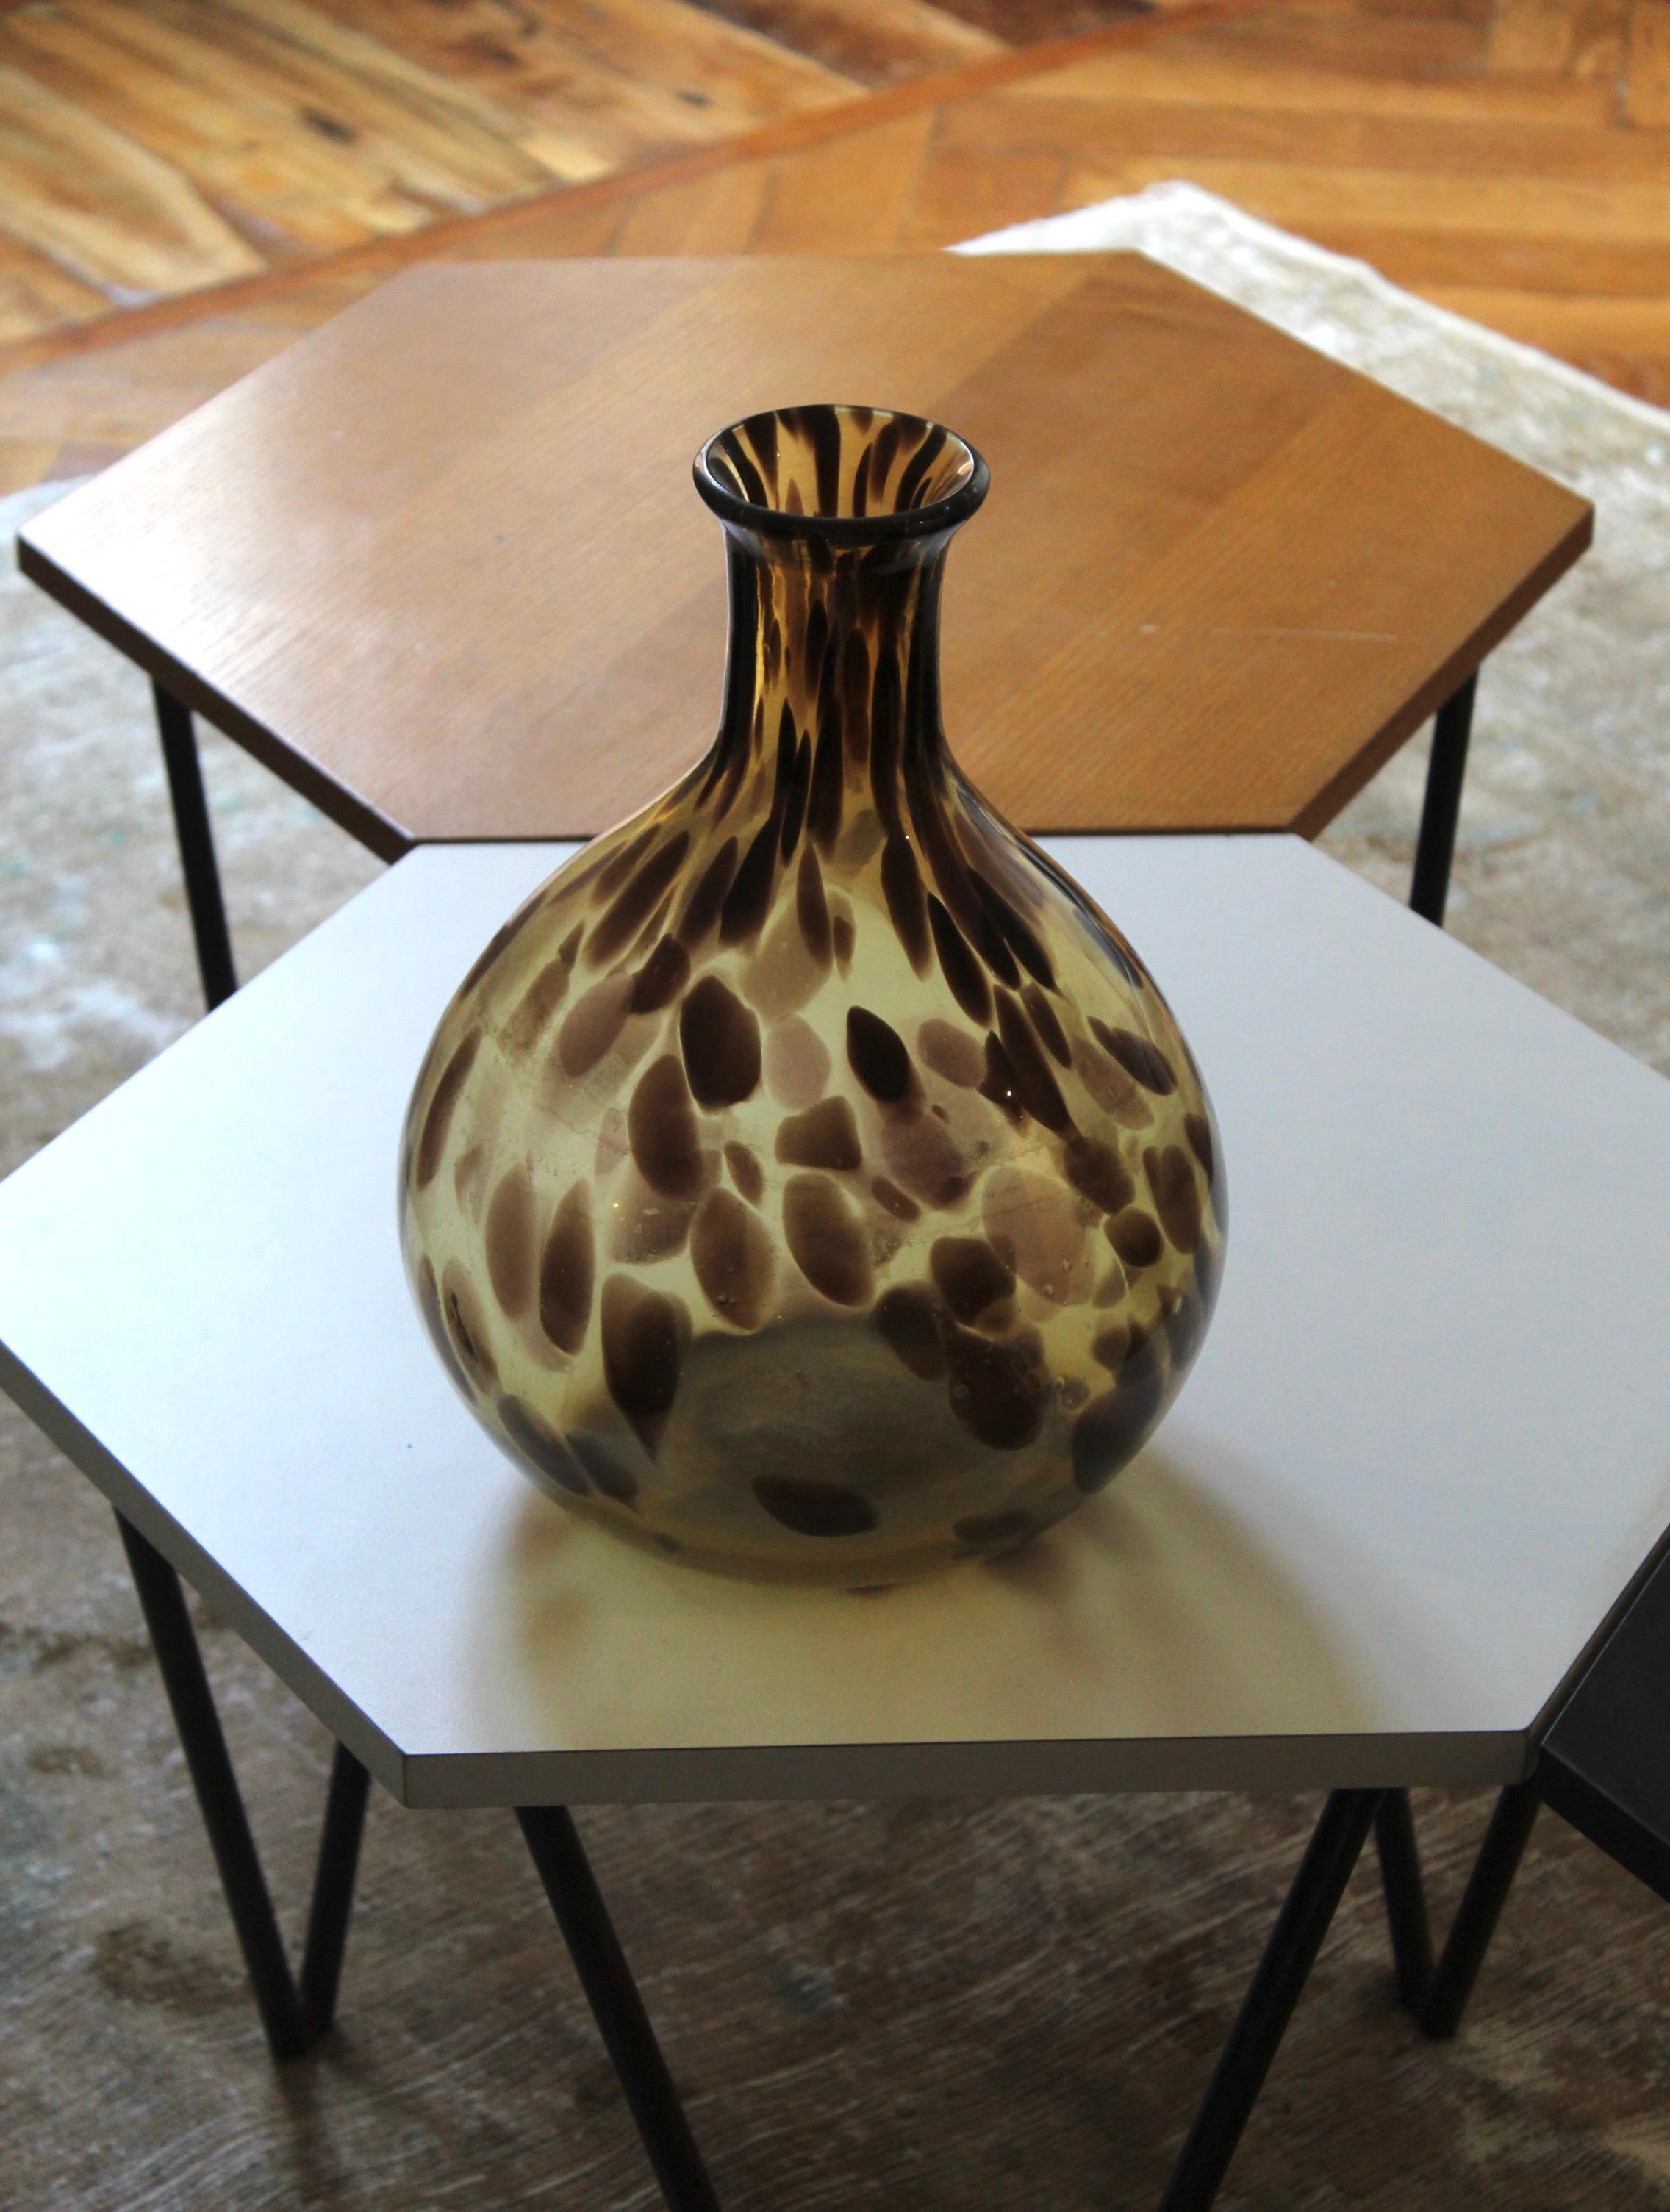 A sizeable blown Murano Glass vase, designed by Christian Dior and produced in Italy, c. 1960s.